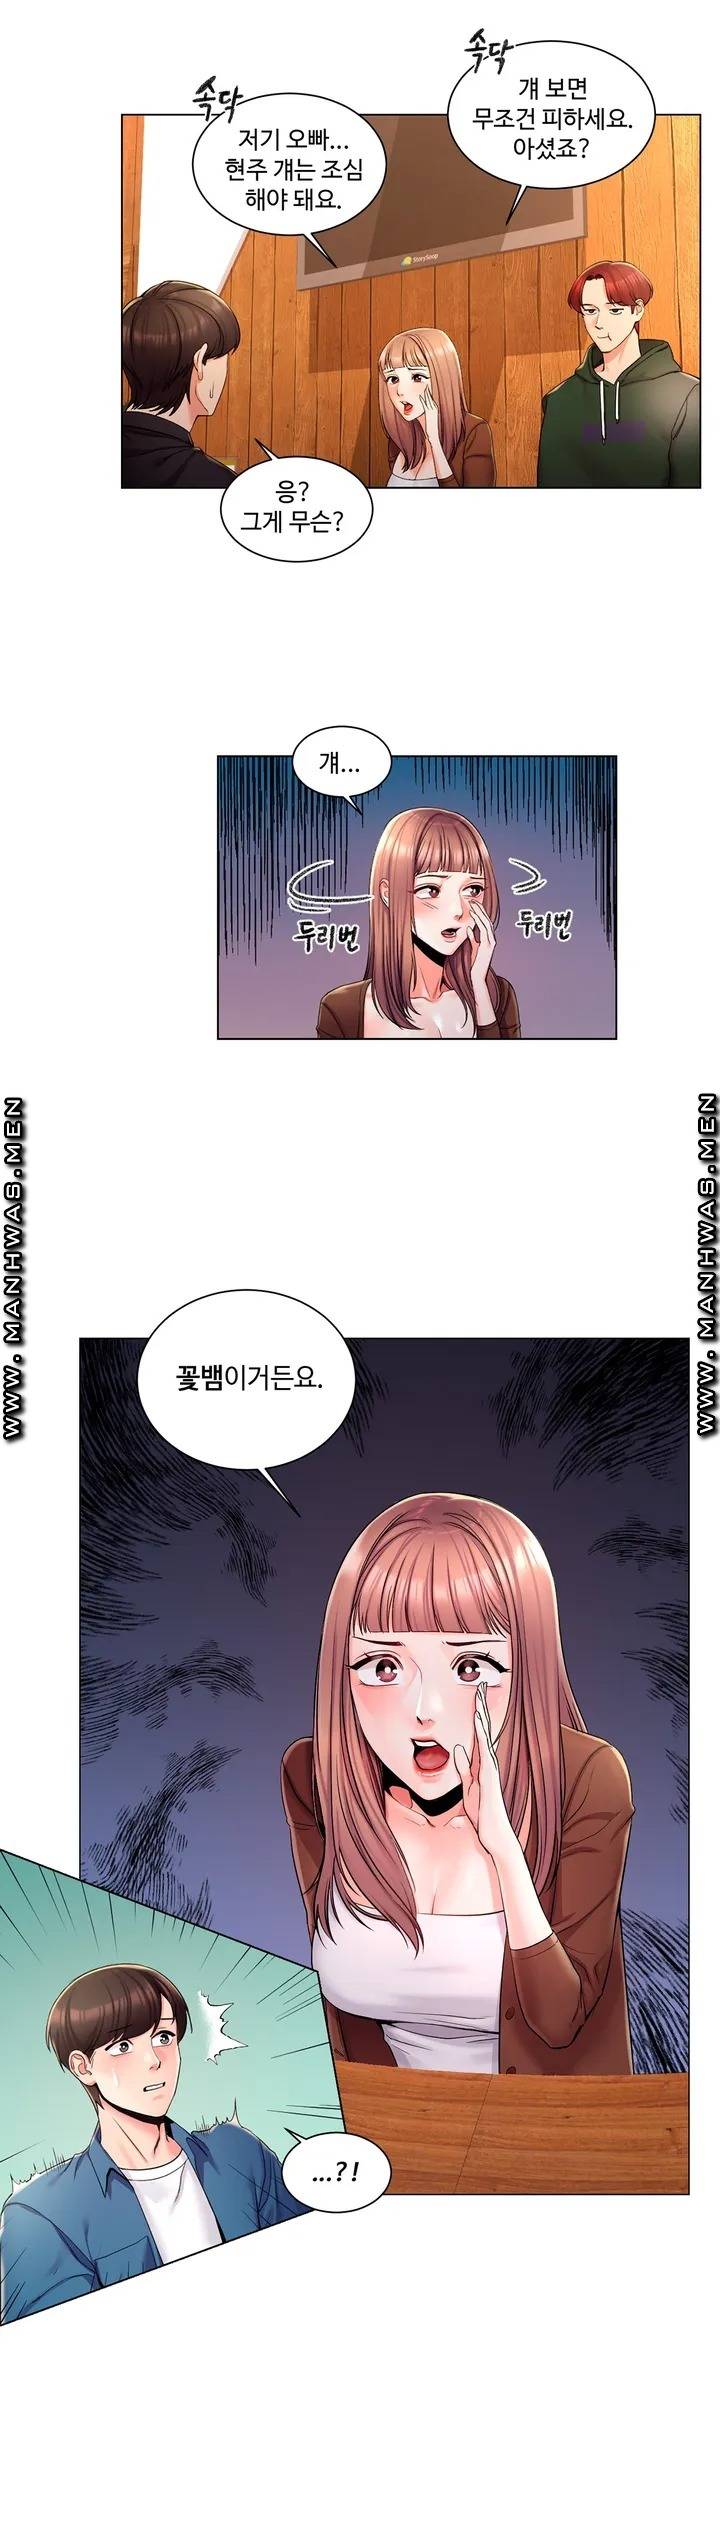 Campus Love Raw - Chapter 1 Page 29